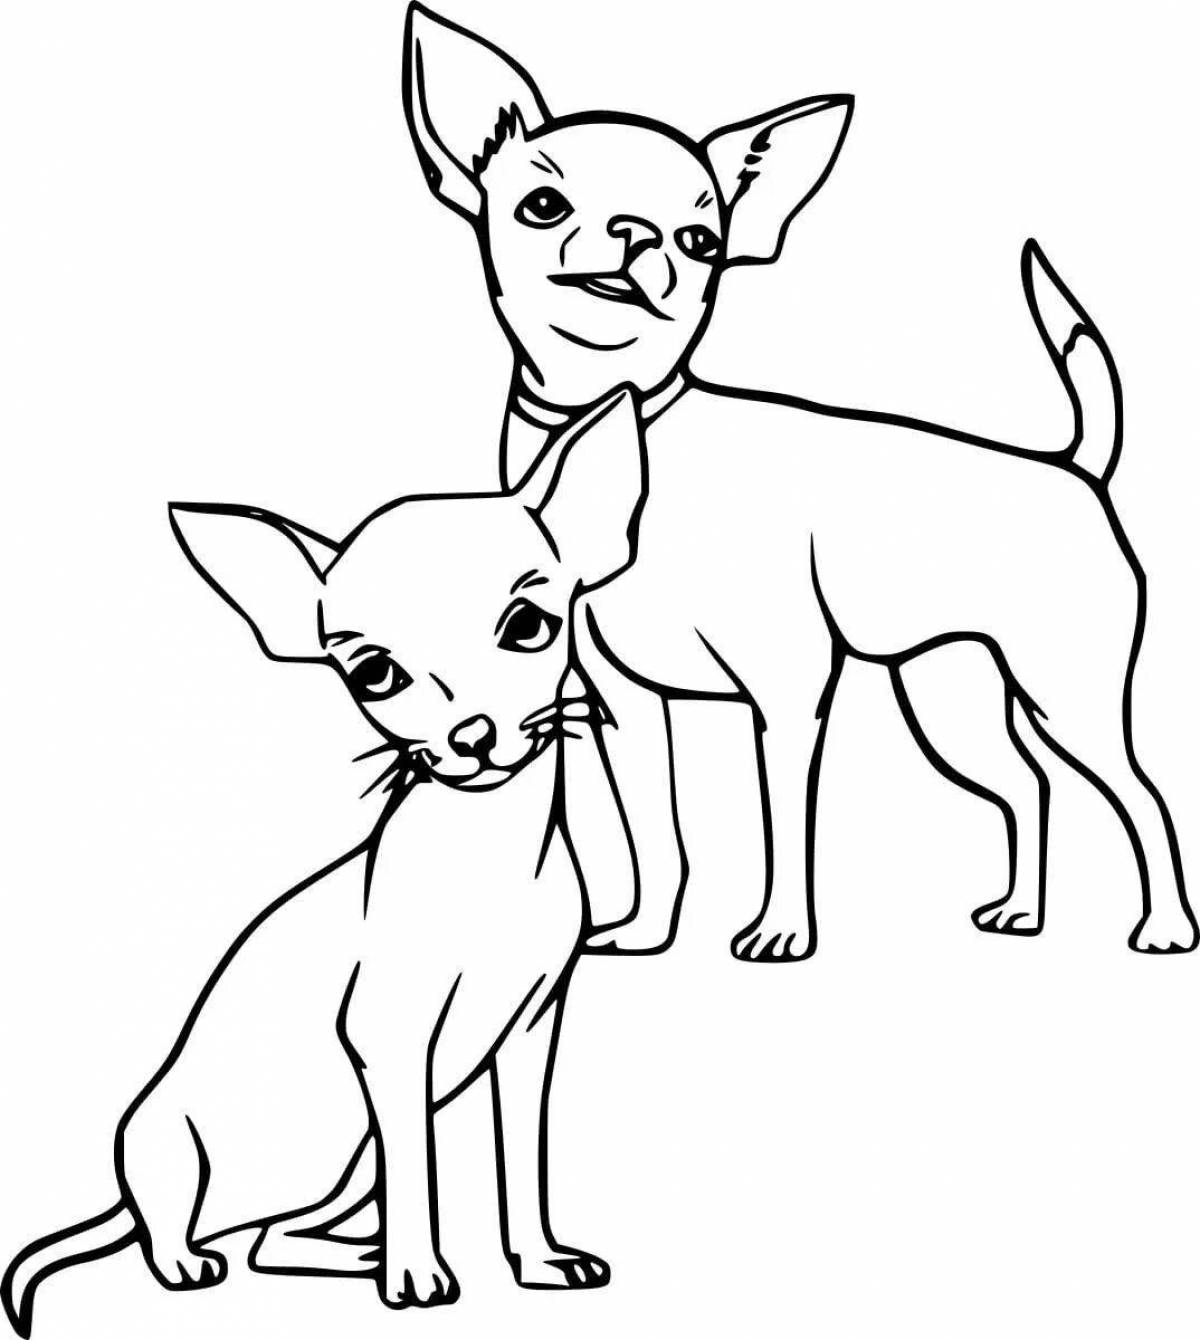 Adorable chihuahua coloring book